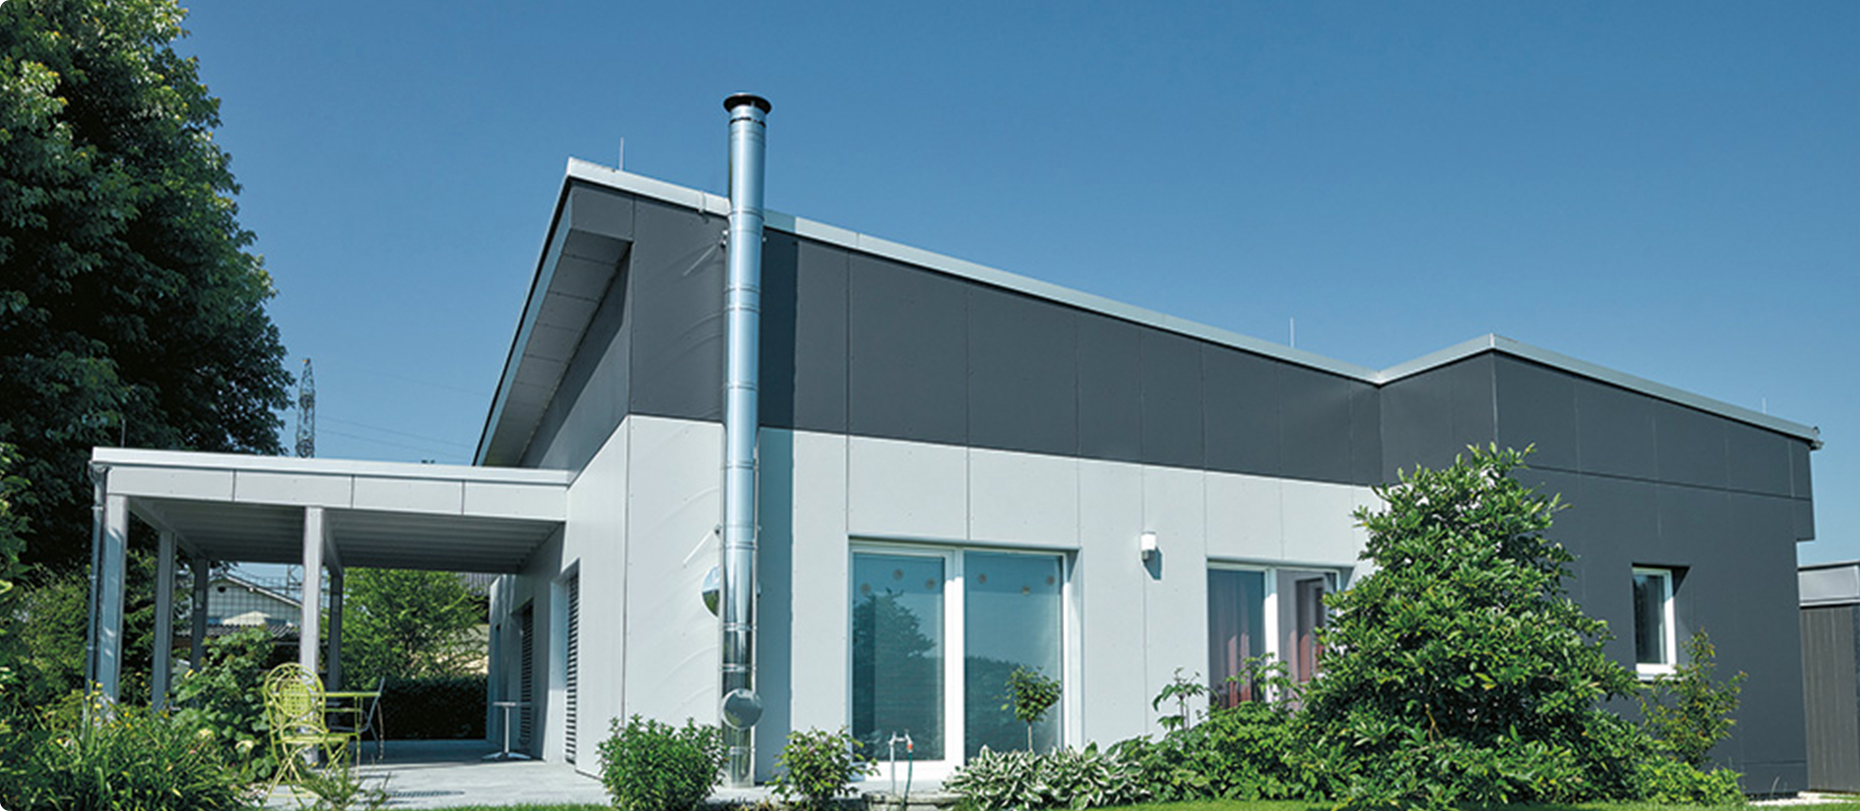 Modern Ecodesign reduces Particle Emissions by up to 90%